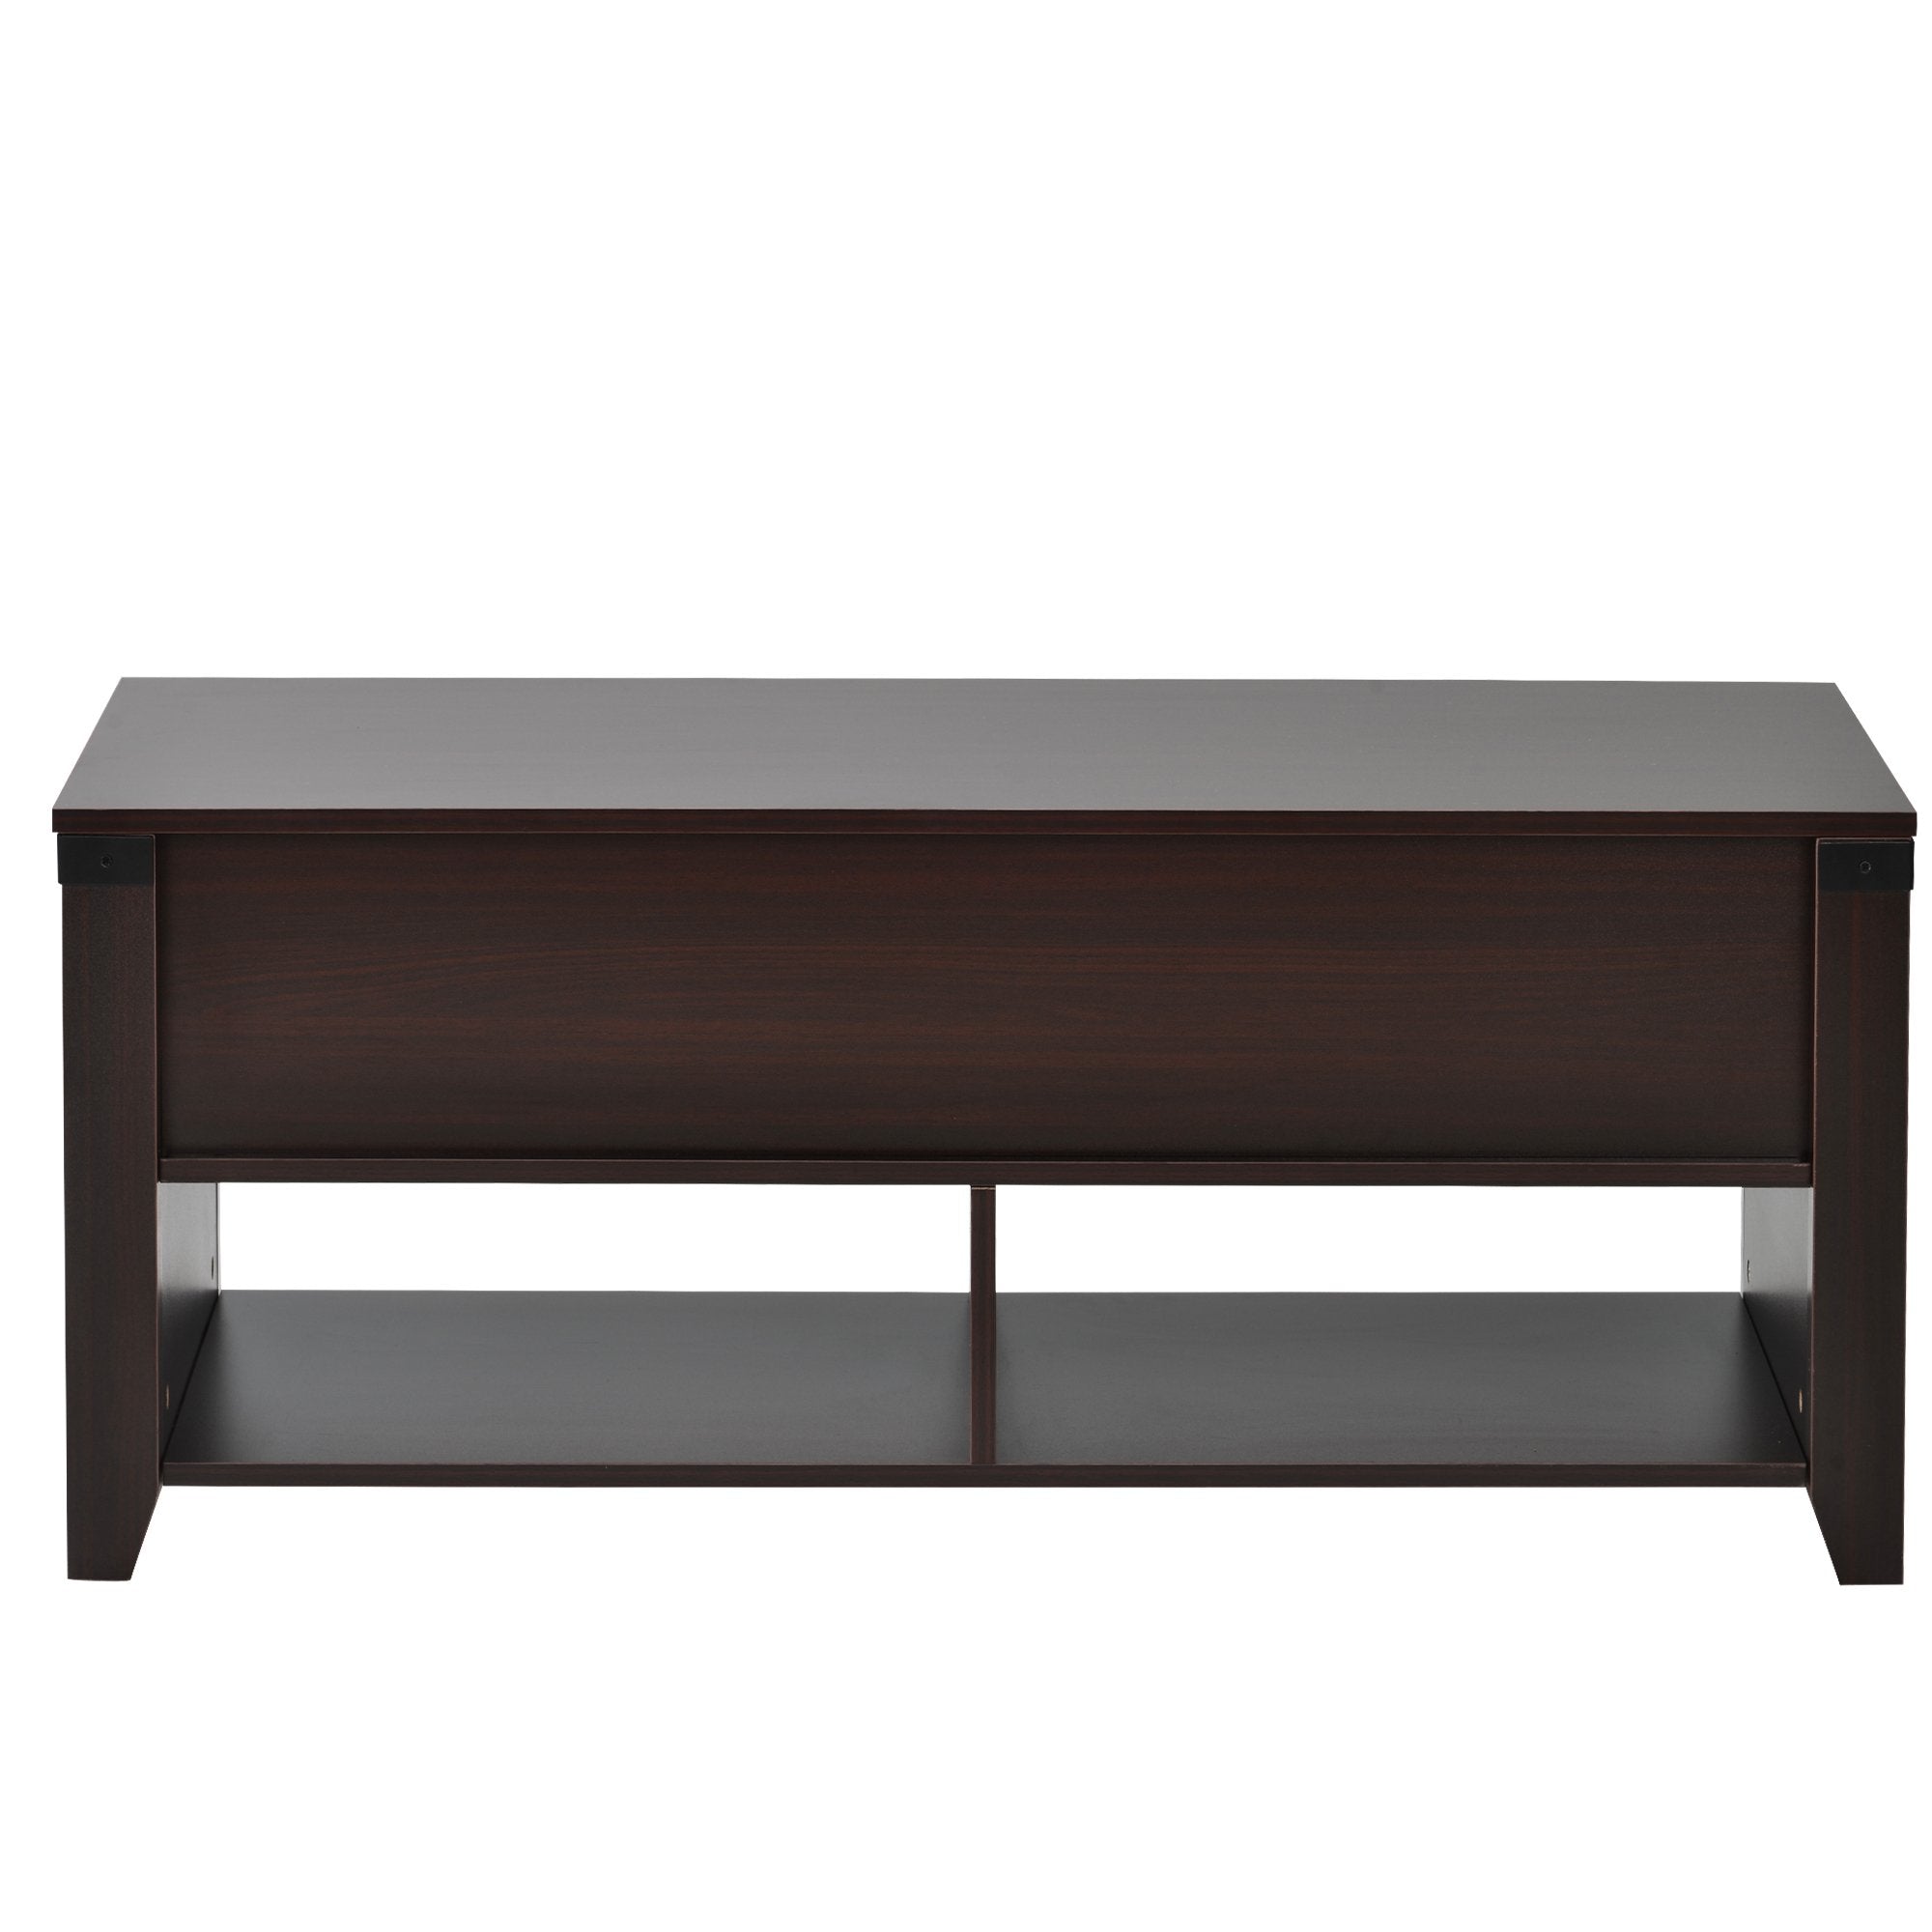 Multipurpose Coffee Table with Drawers ,open shelf and Storage, Lifting Top Table for Living Room-Boyel Living